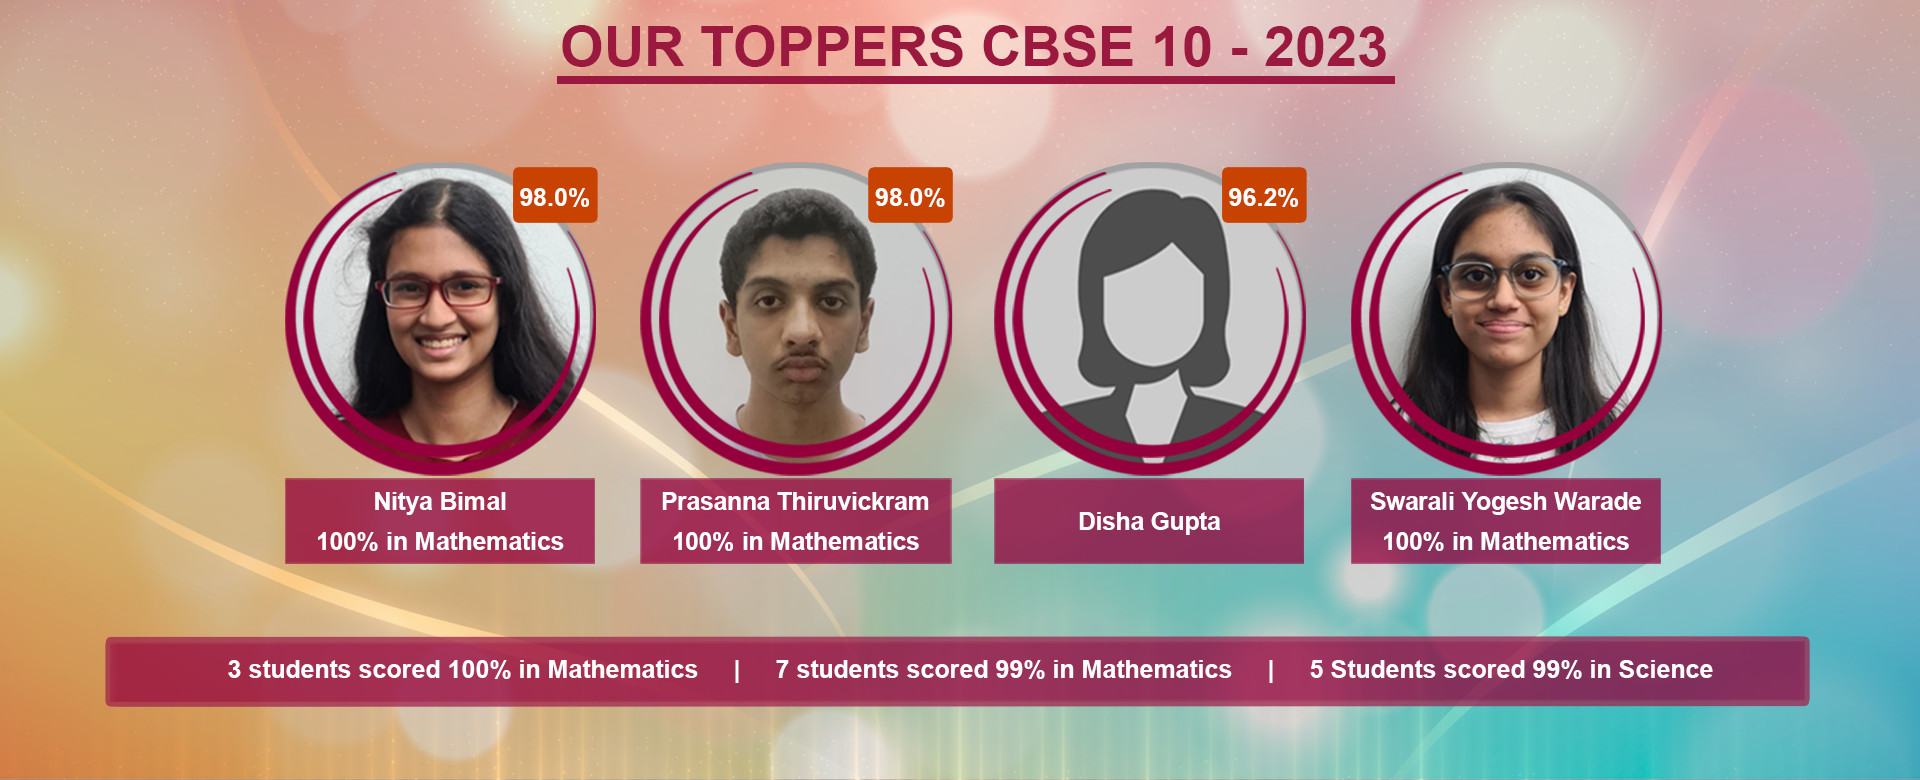 CBSE 10 Toppers 2023